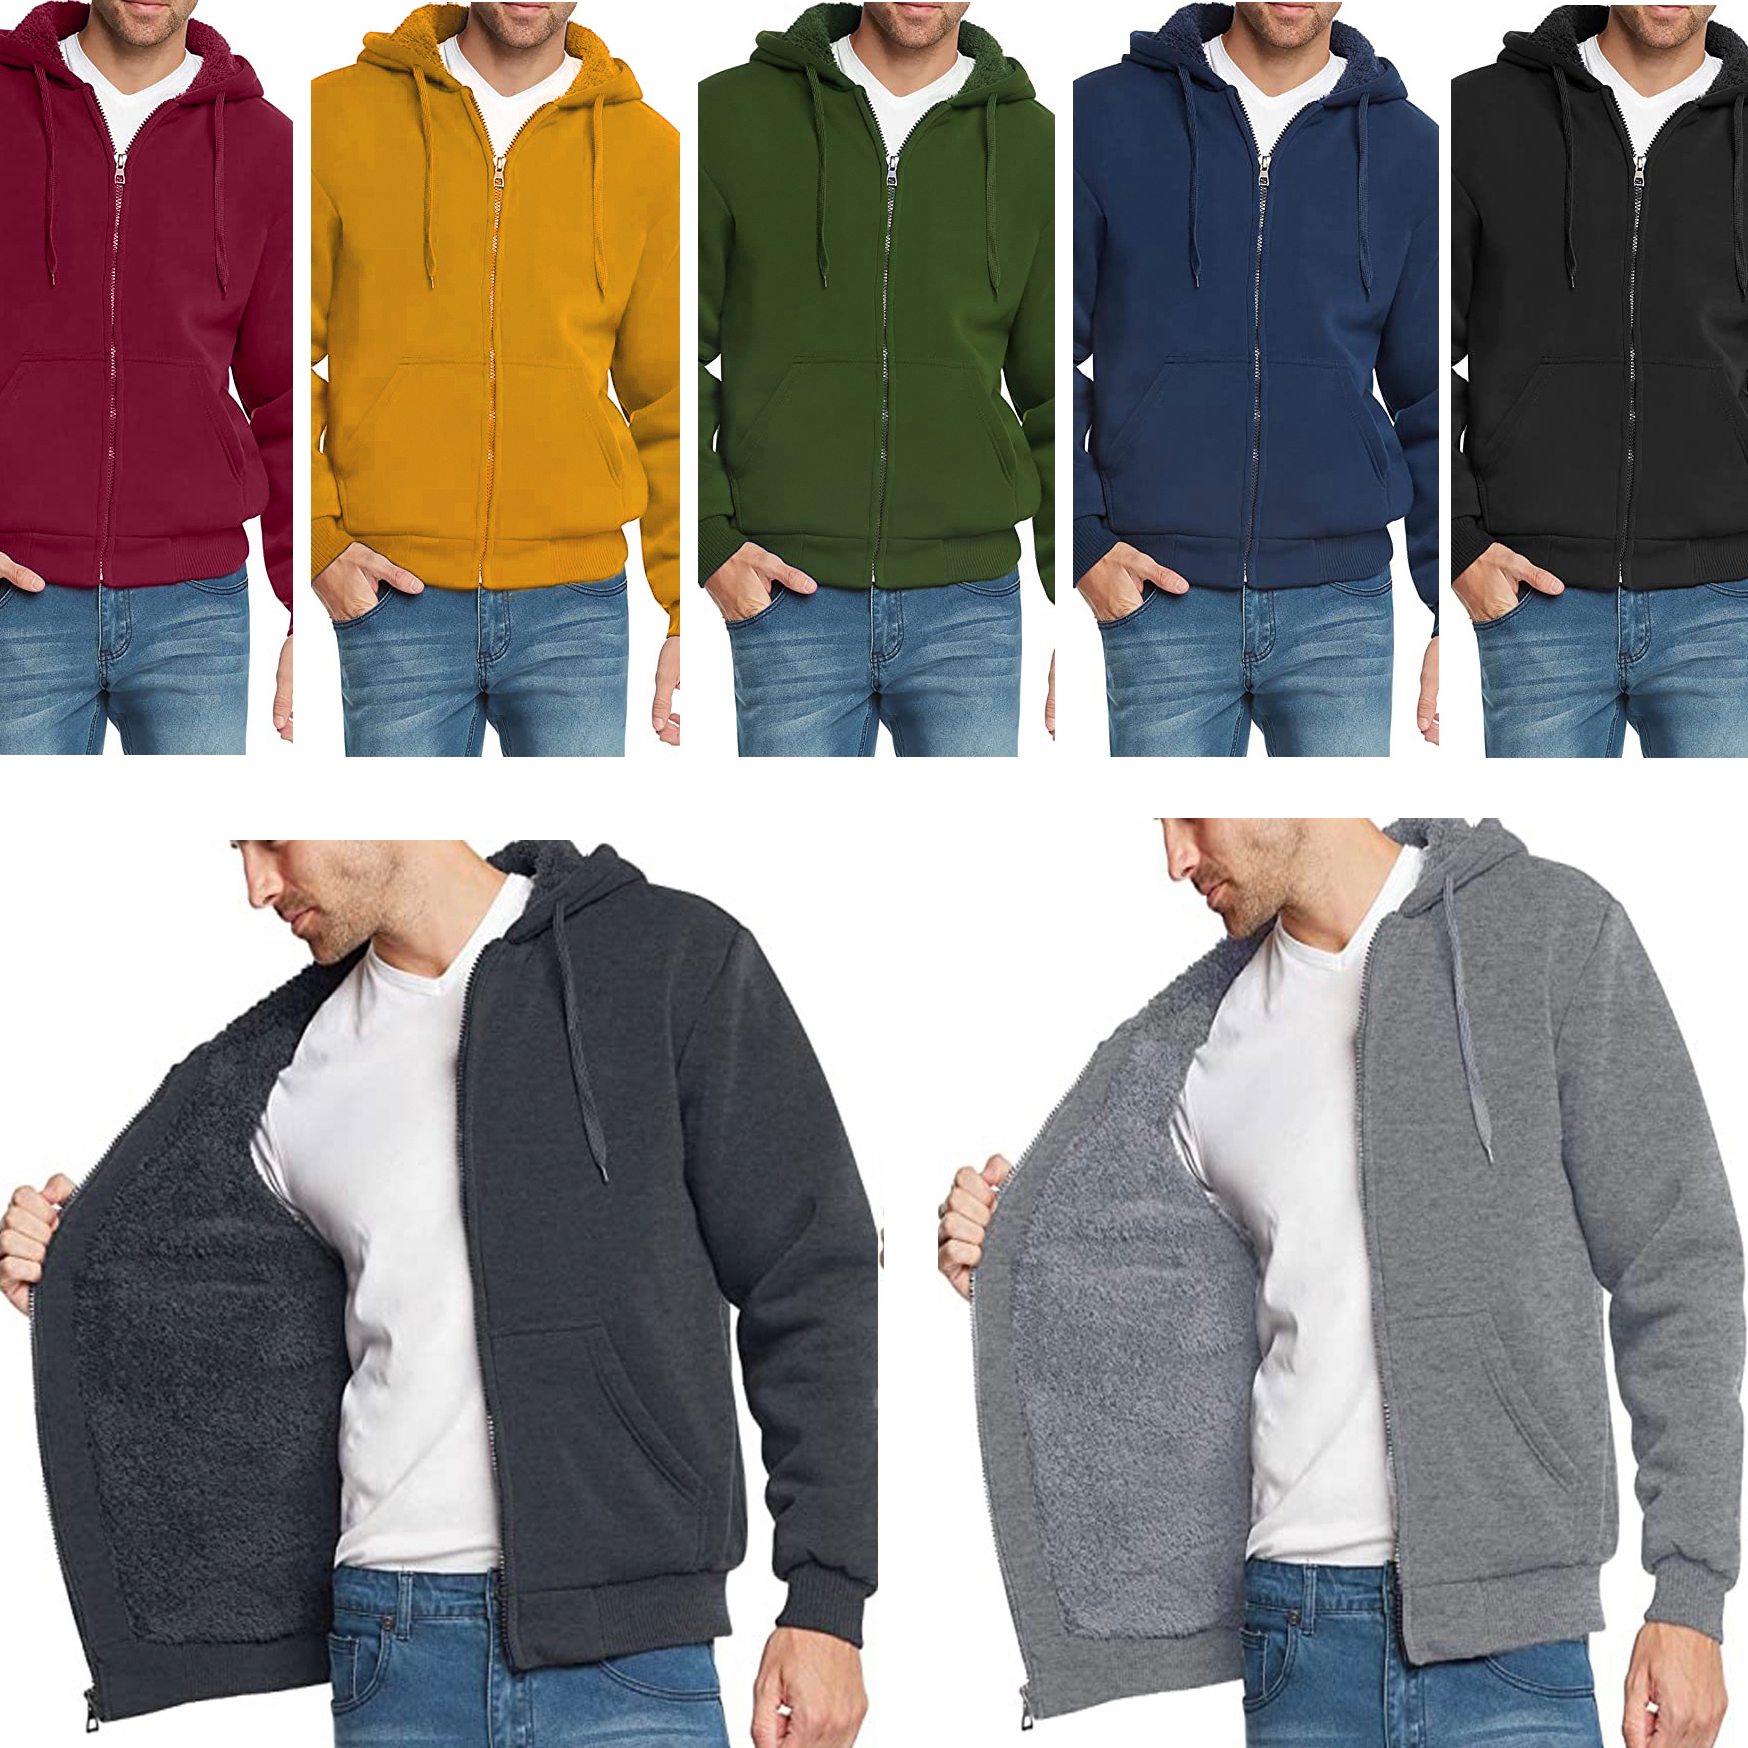 Men's Extra-Thick Sherpa Lined Fleece Hoodie (Big & Tall Sizes Available) - Charcoal, Small